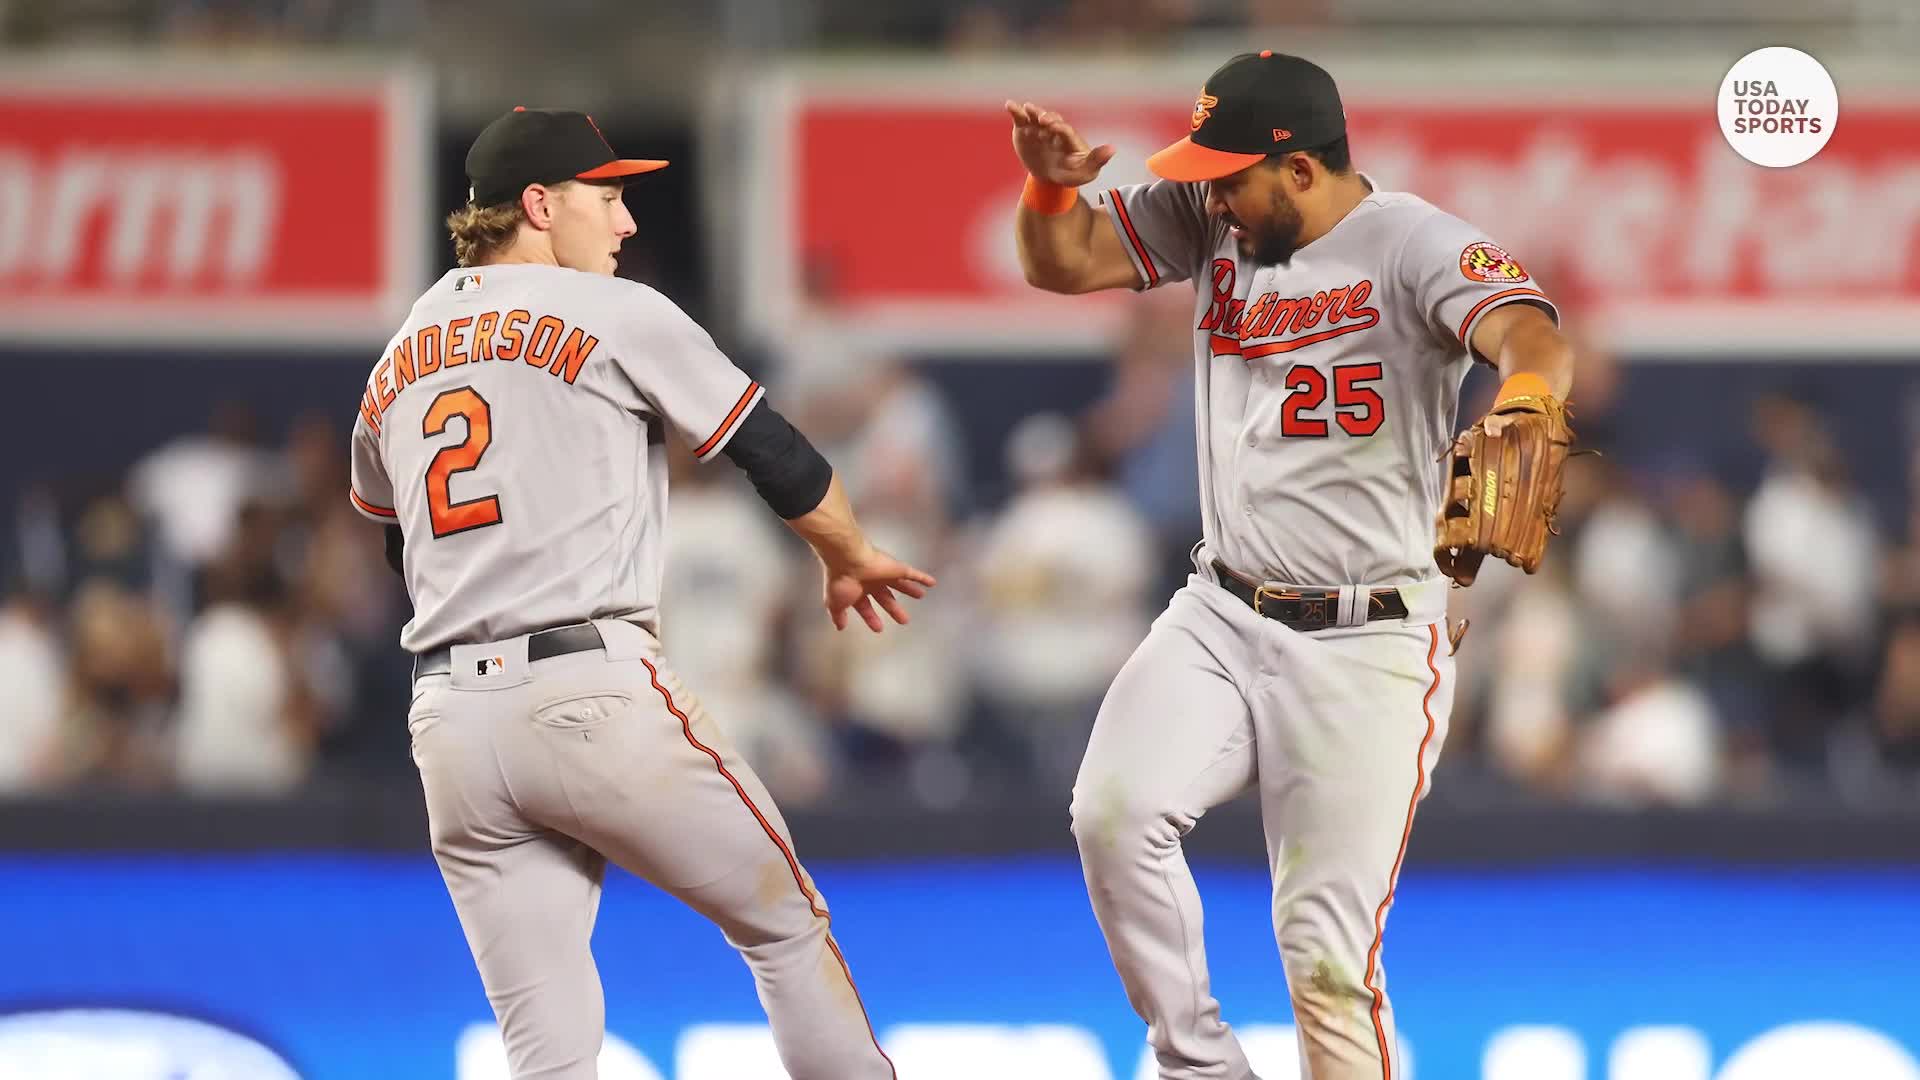 Fans say the Orioles have baseball's best uniforms